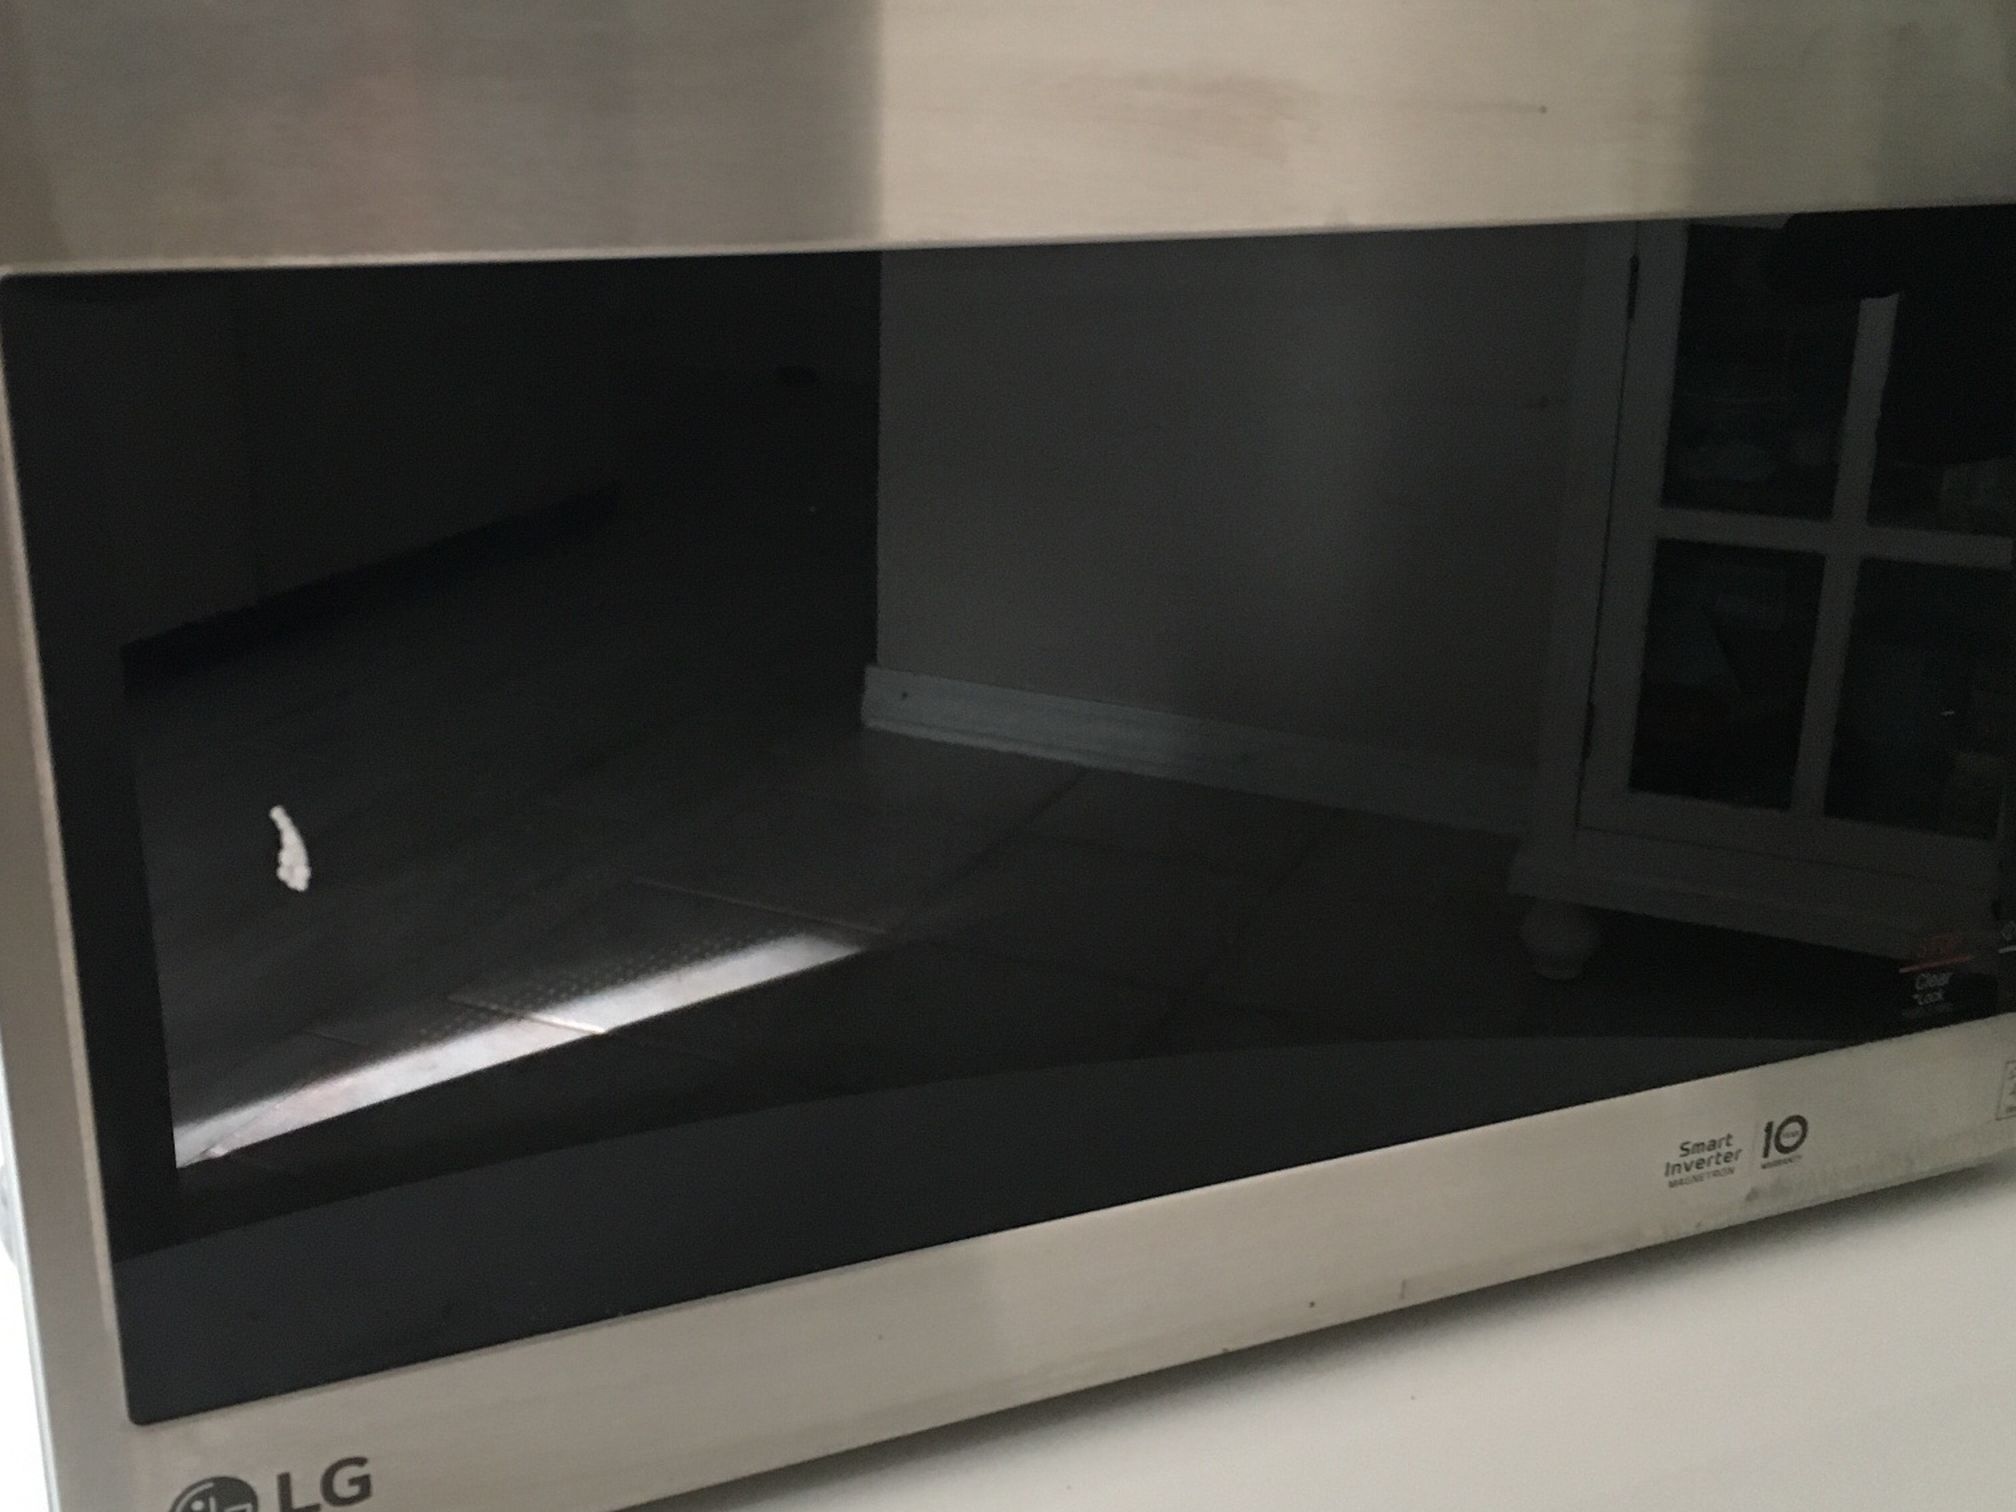 LG Microwave With Faulty Side Panel